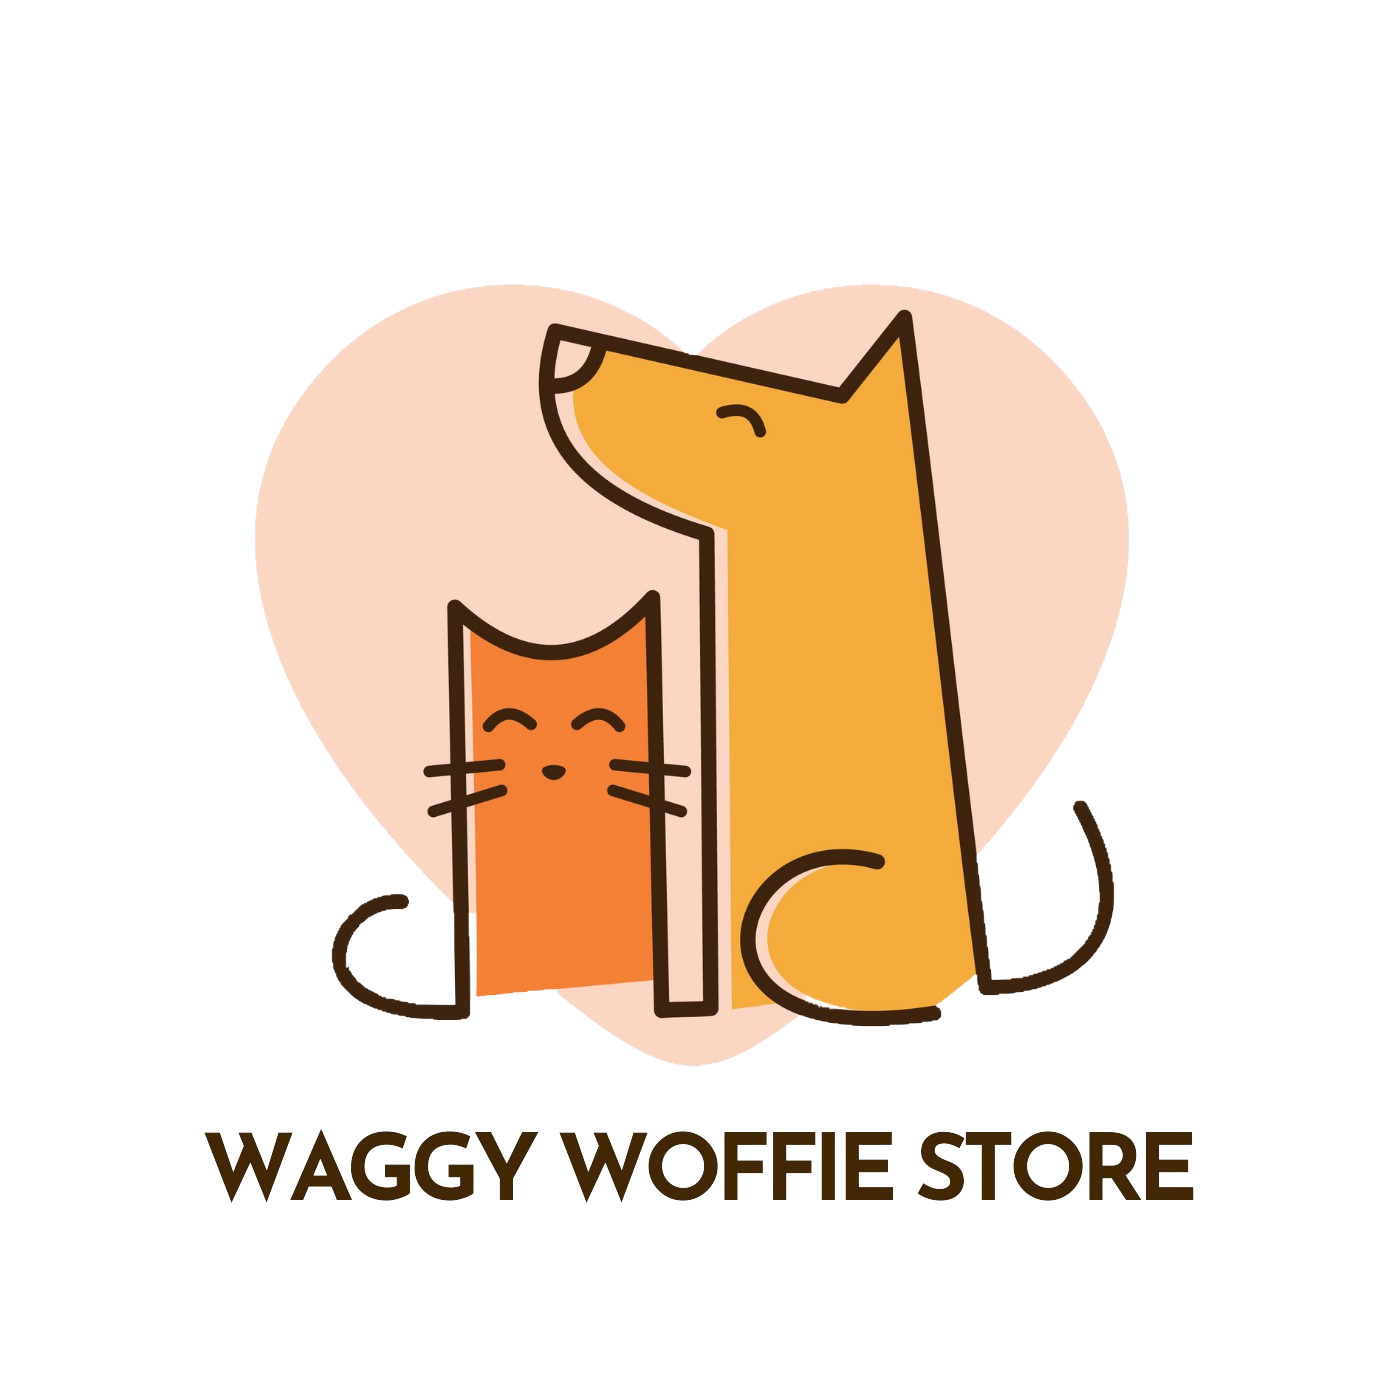 WAGGY WOFFIE STORE